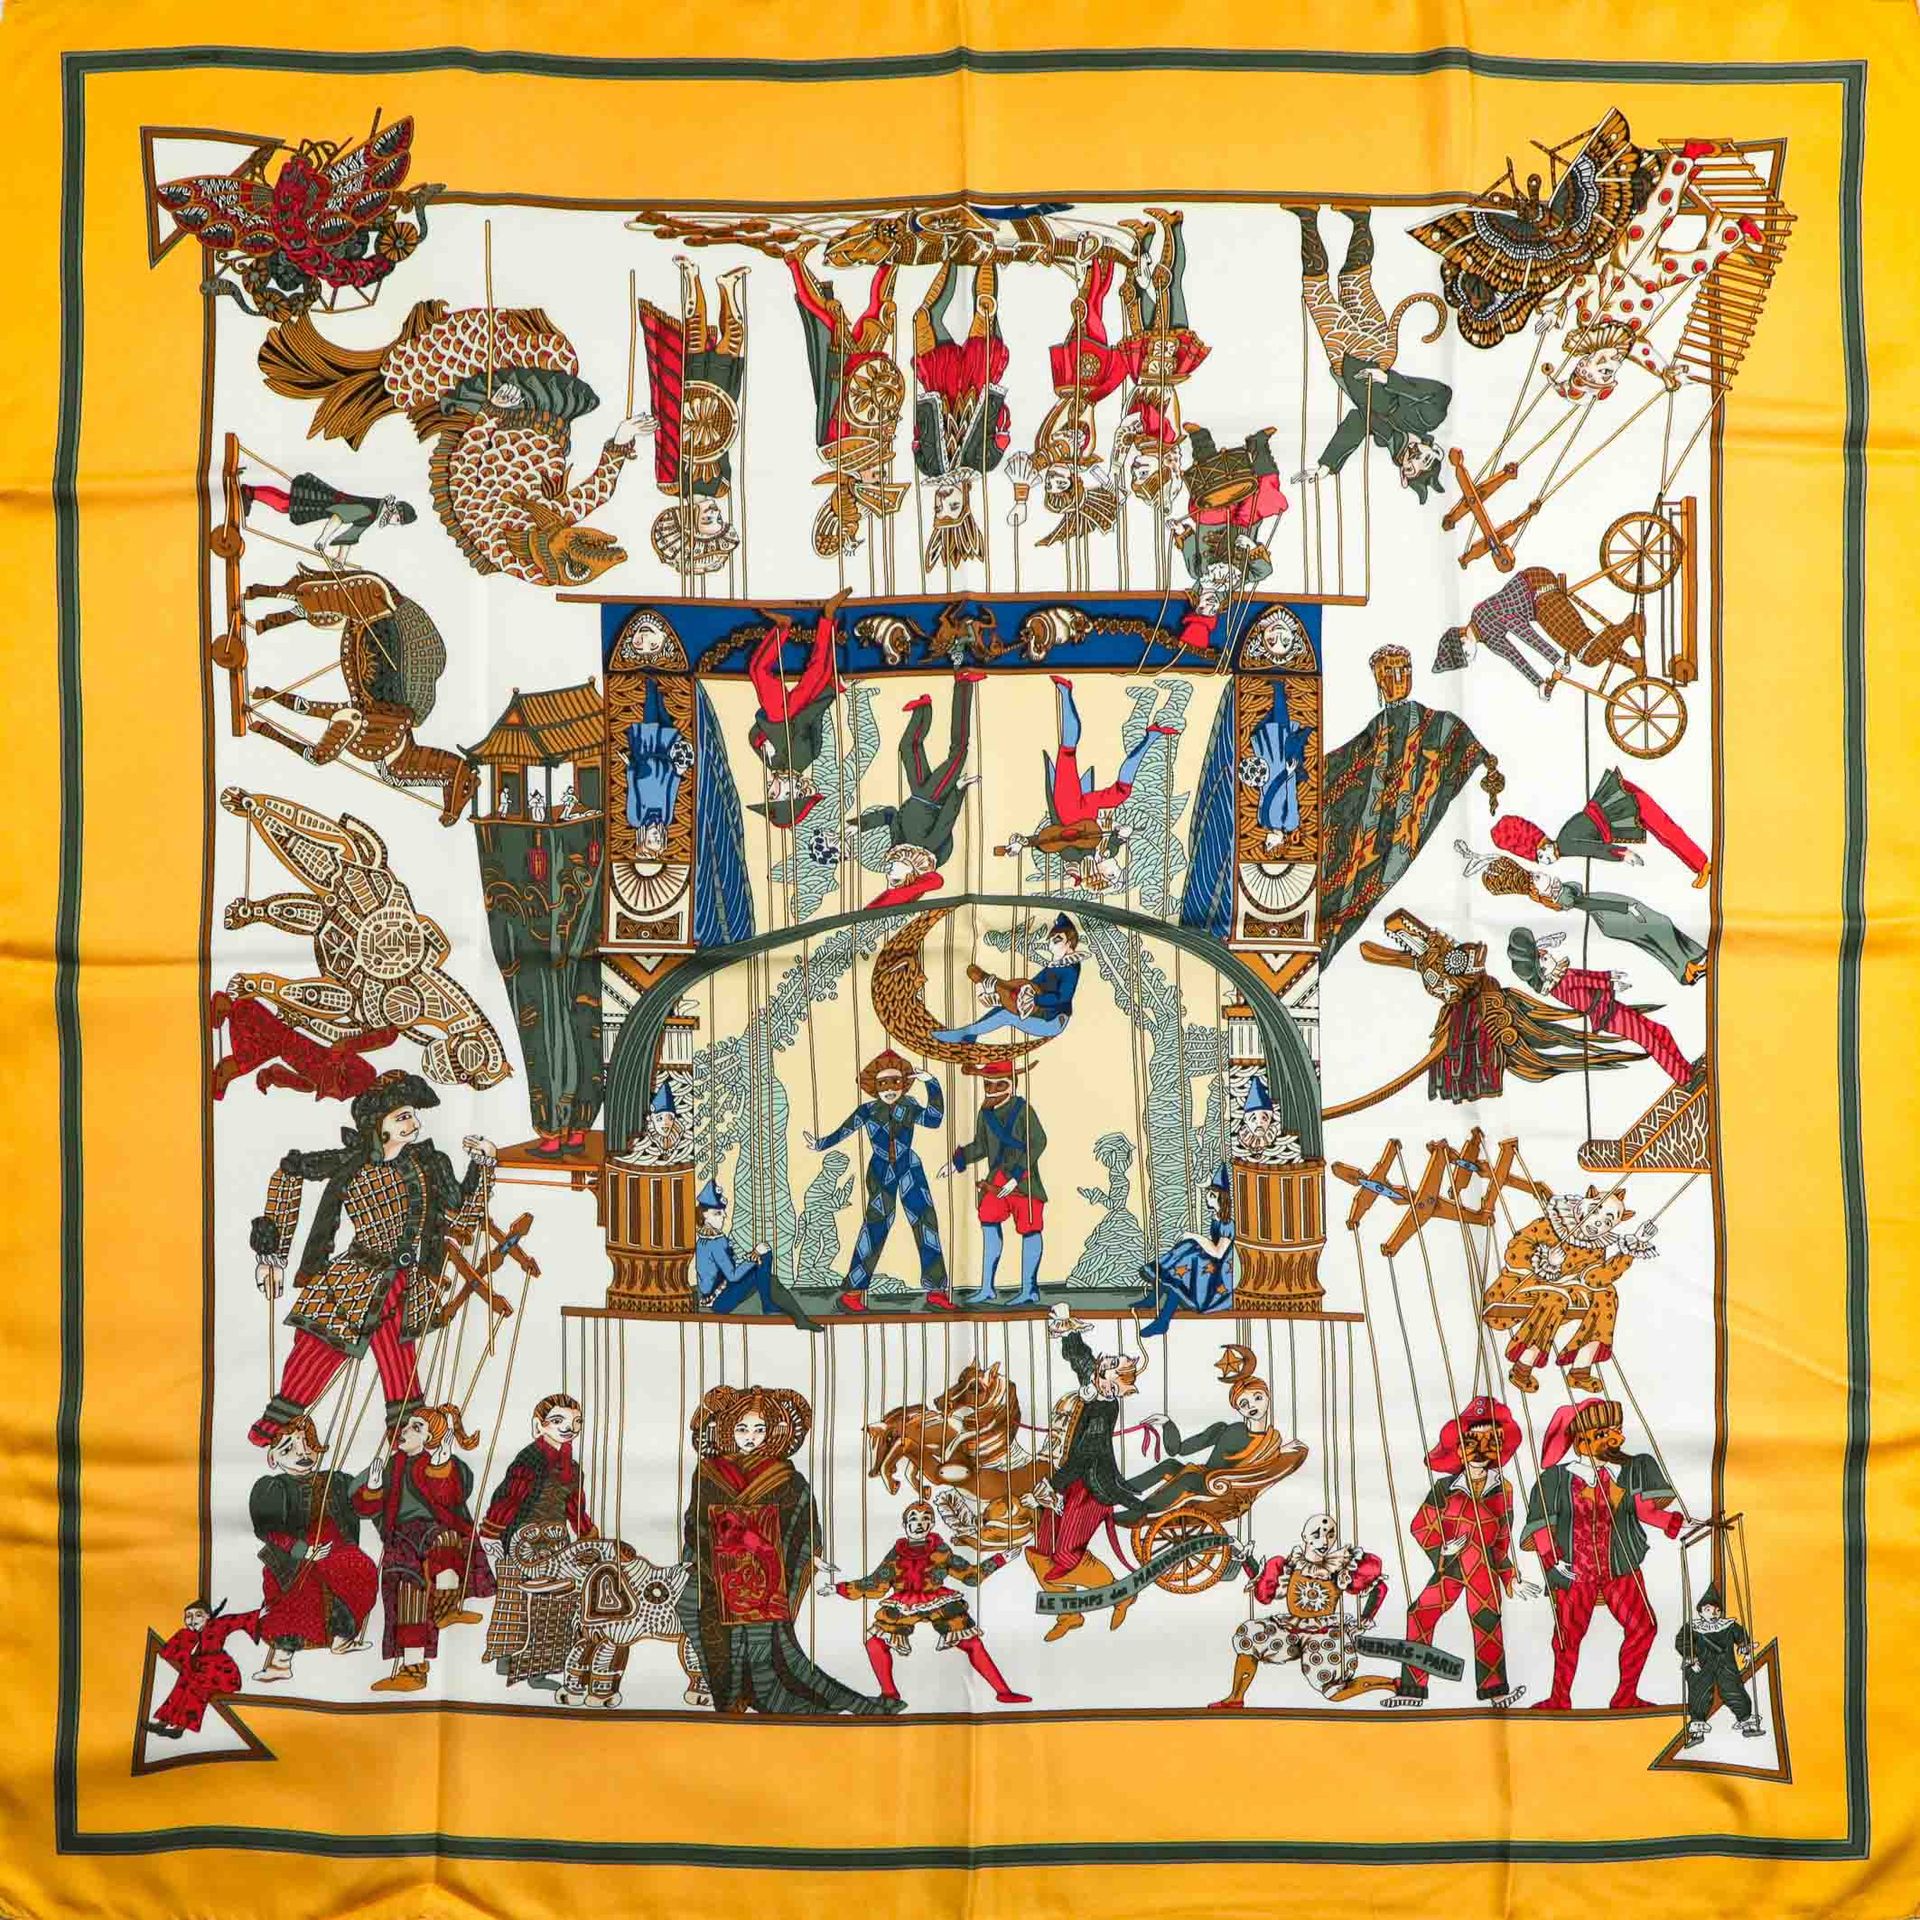 Null HERMES - Printed silk square titled "Le temps des marionnettes" - Ochre bor&hellip;